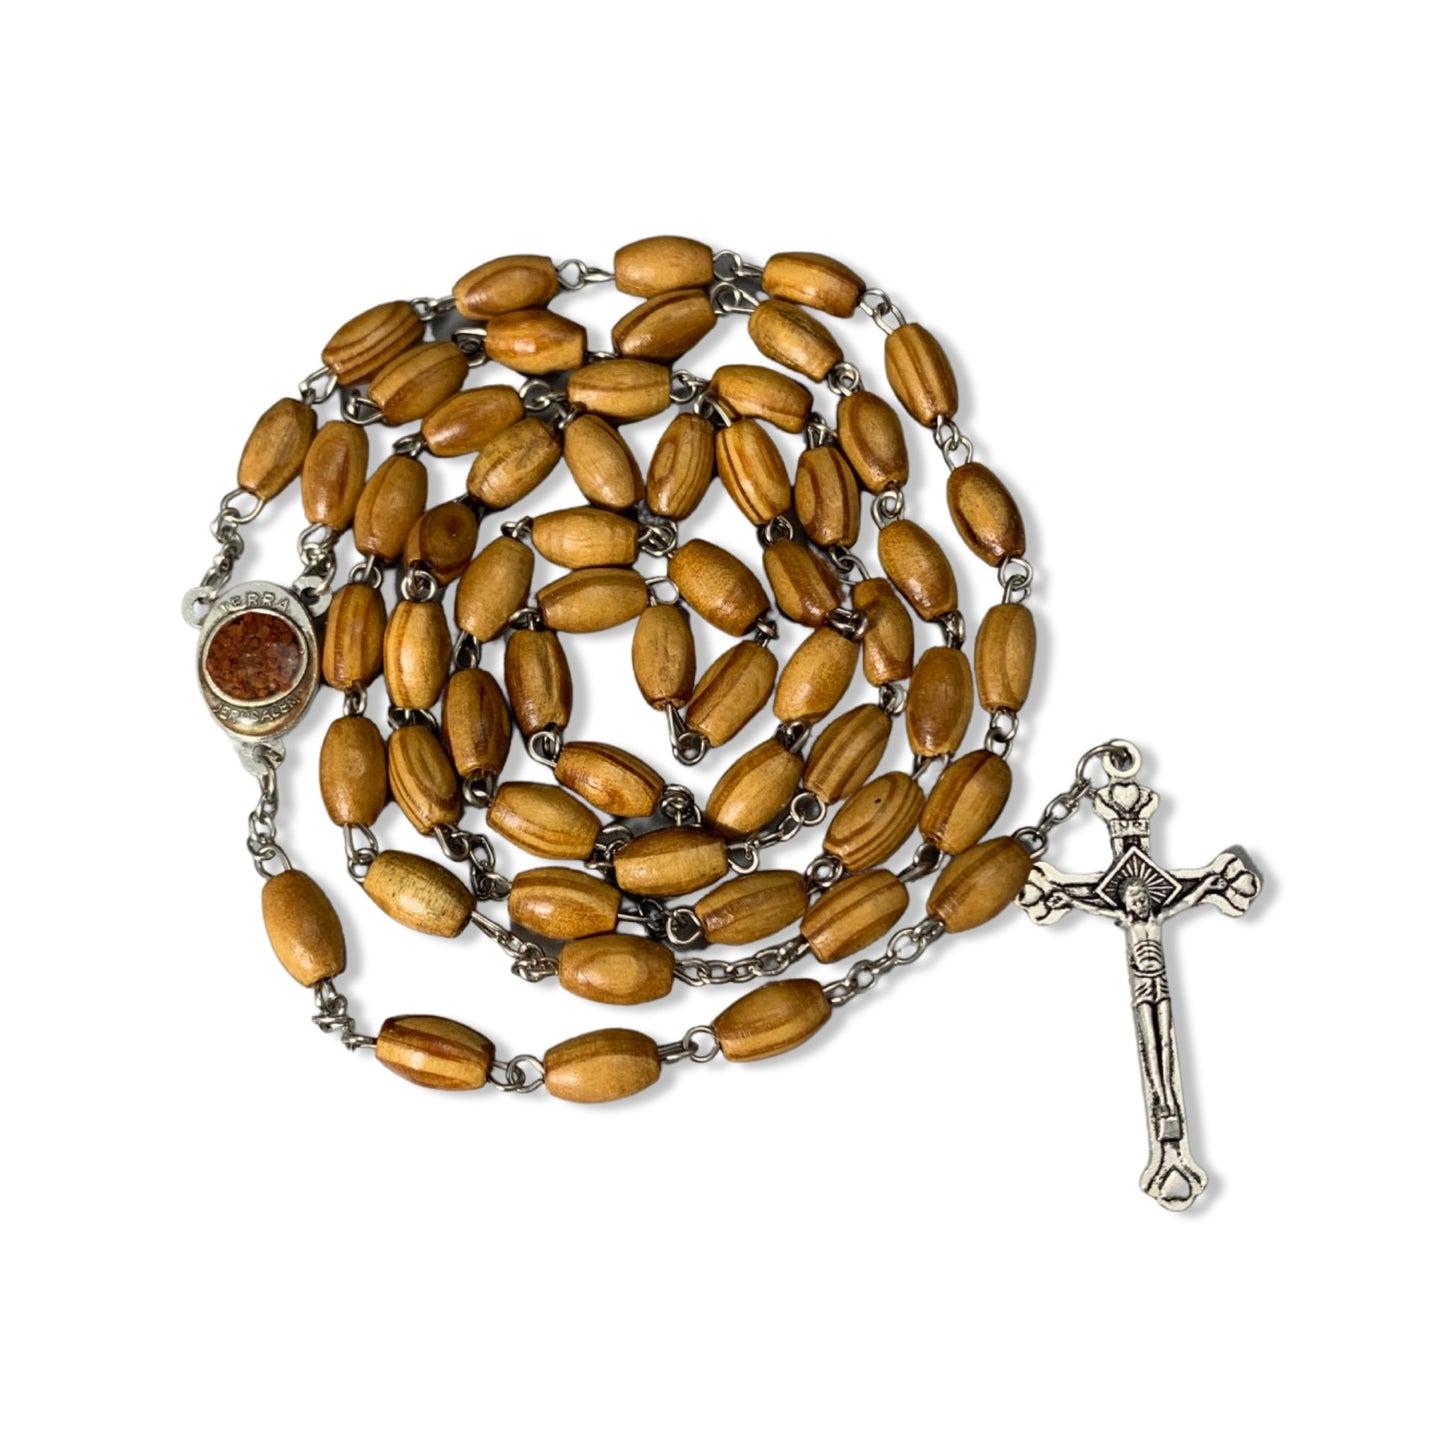 Olive Wood Our Lady of Tenderness Rosary with Soil